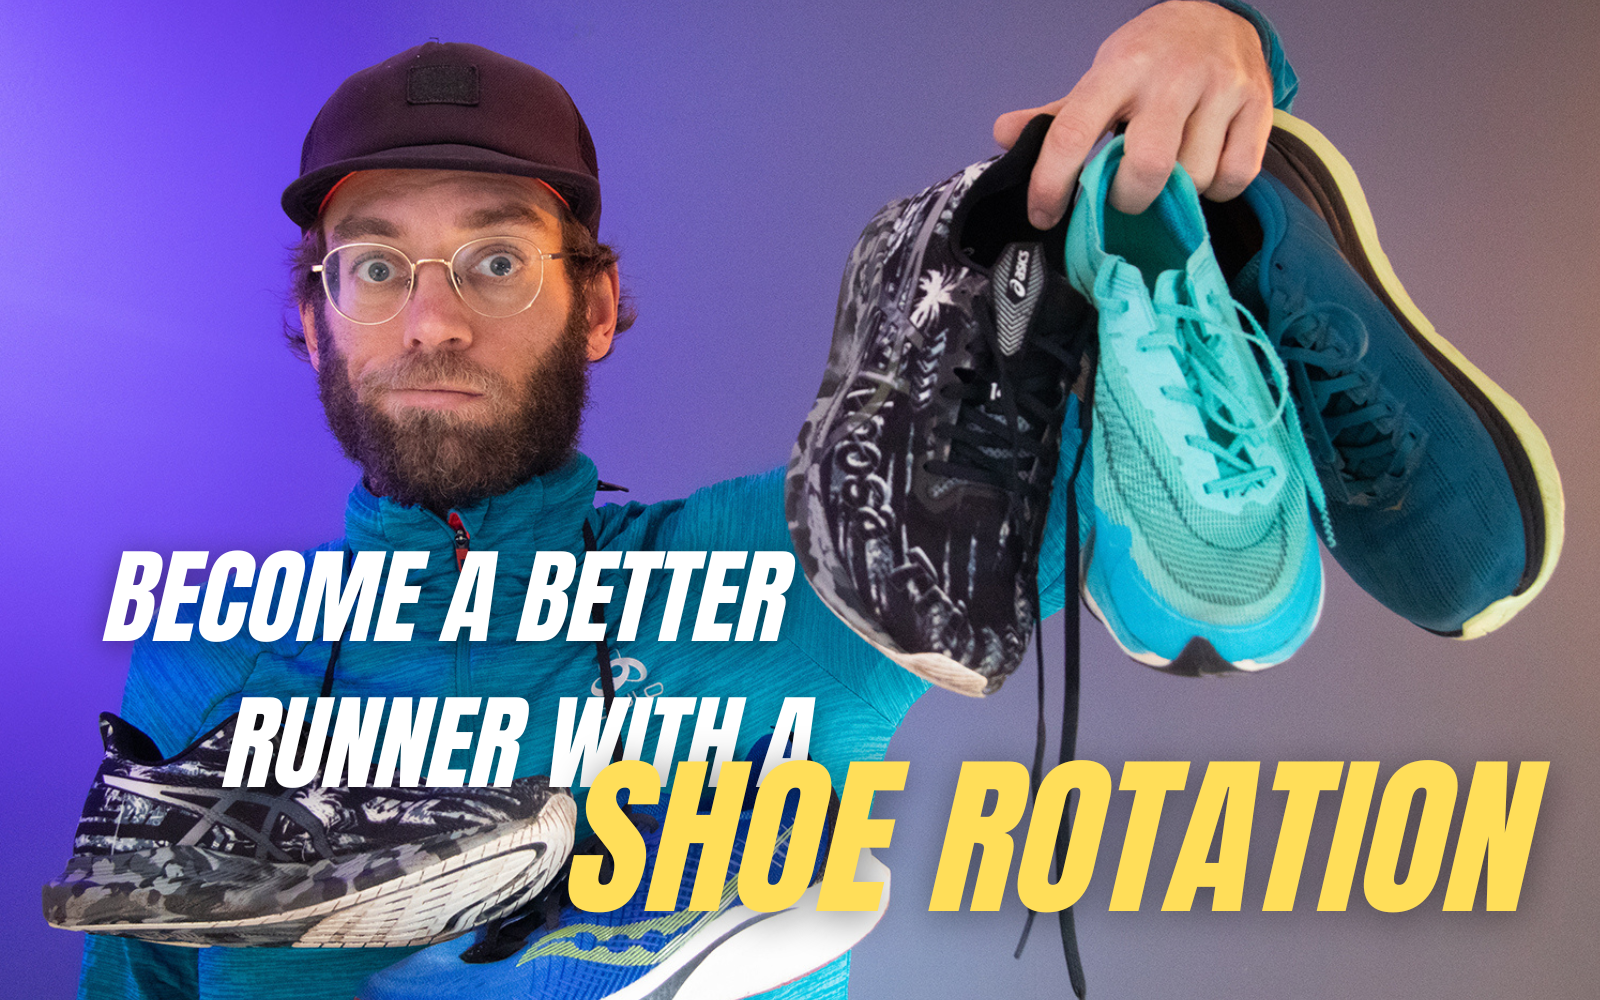 Become a better runner with a running shoe rotation.